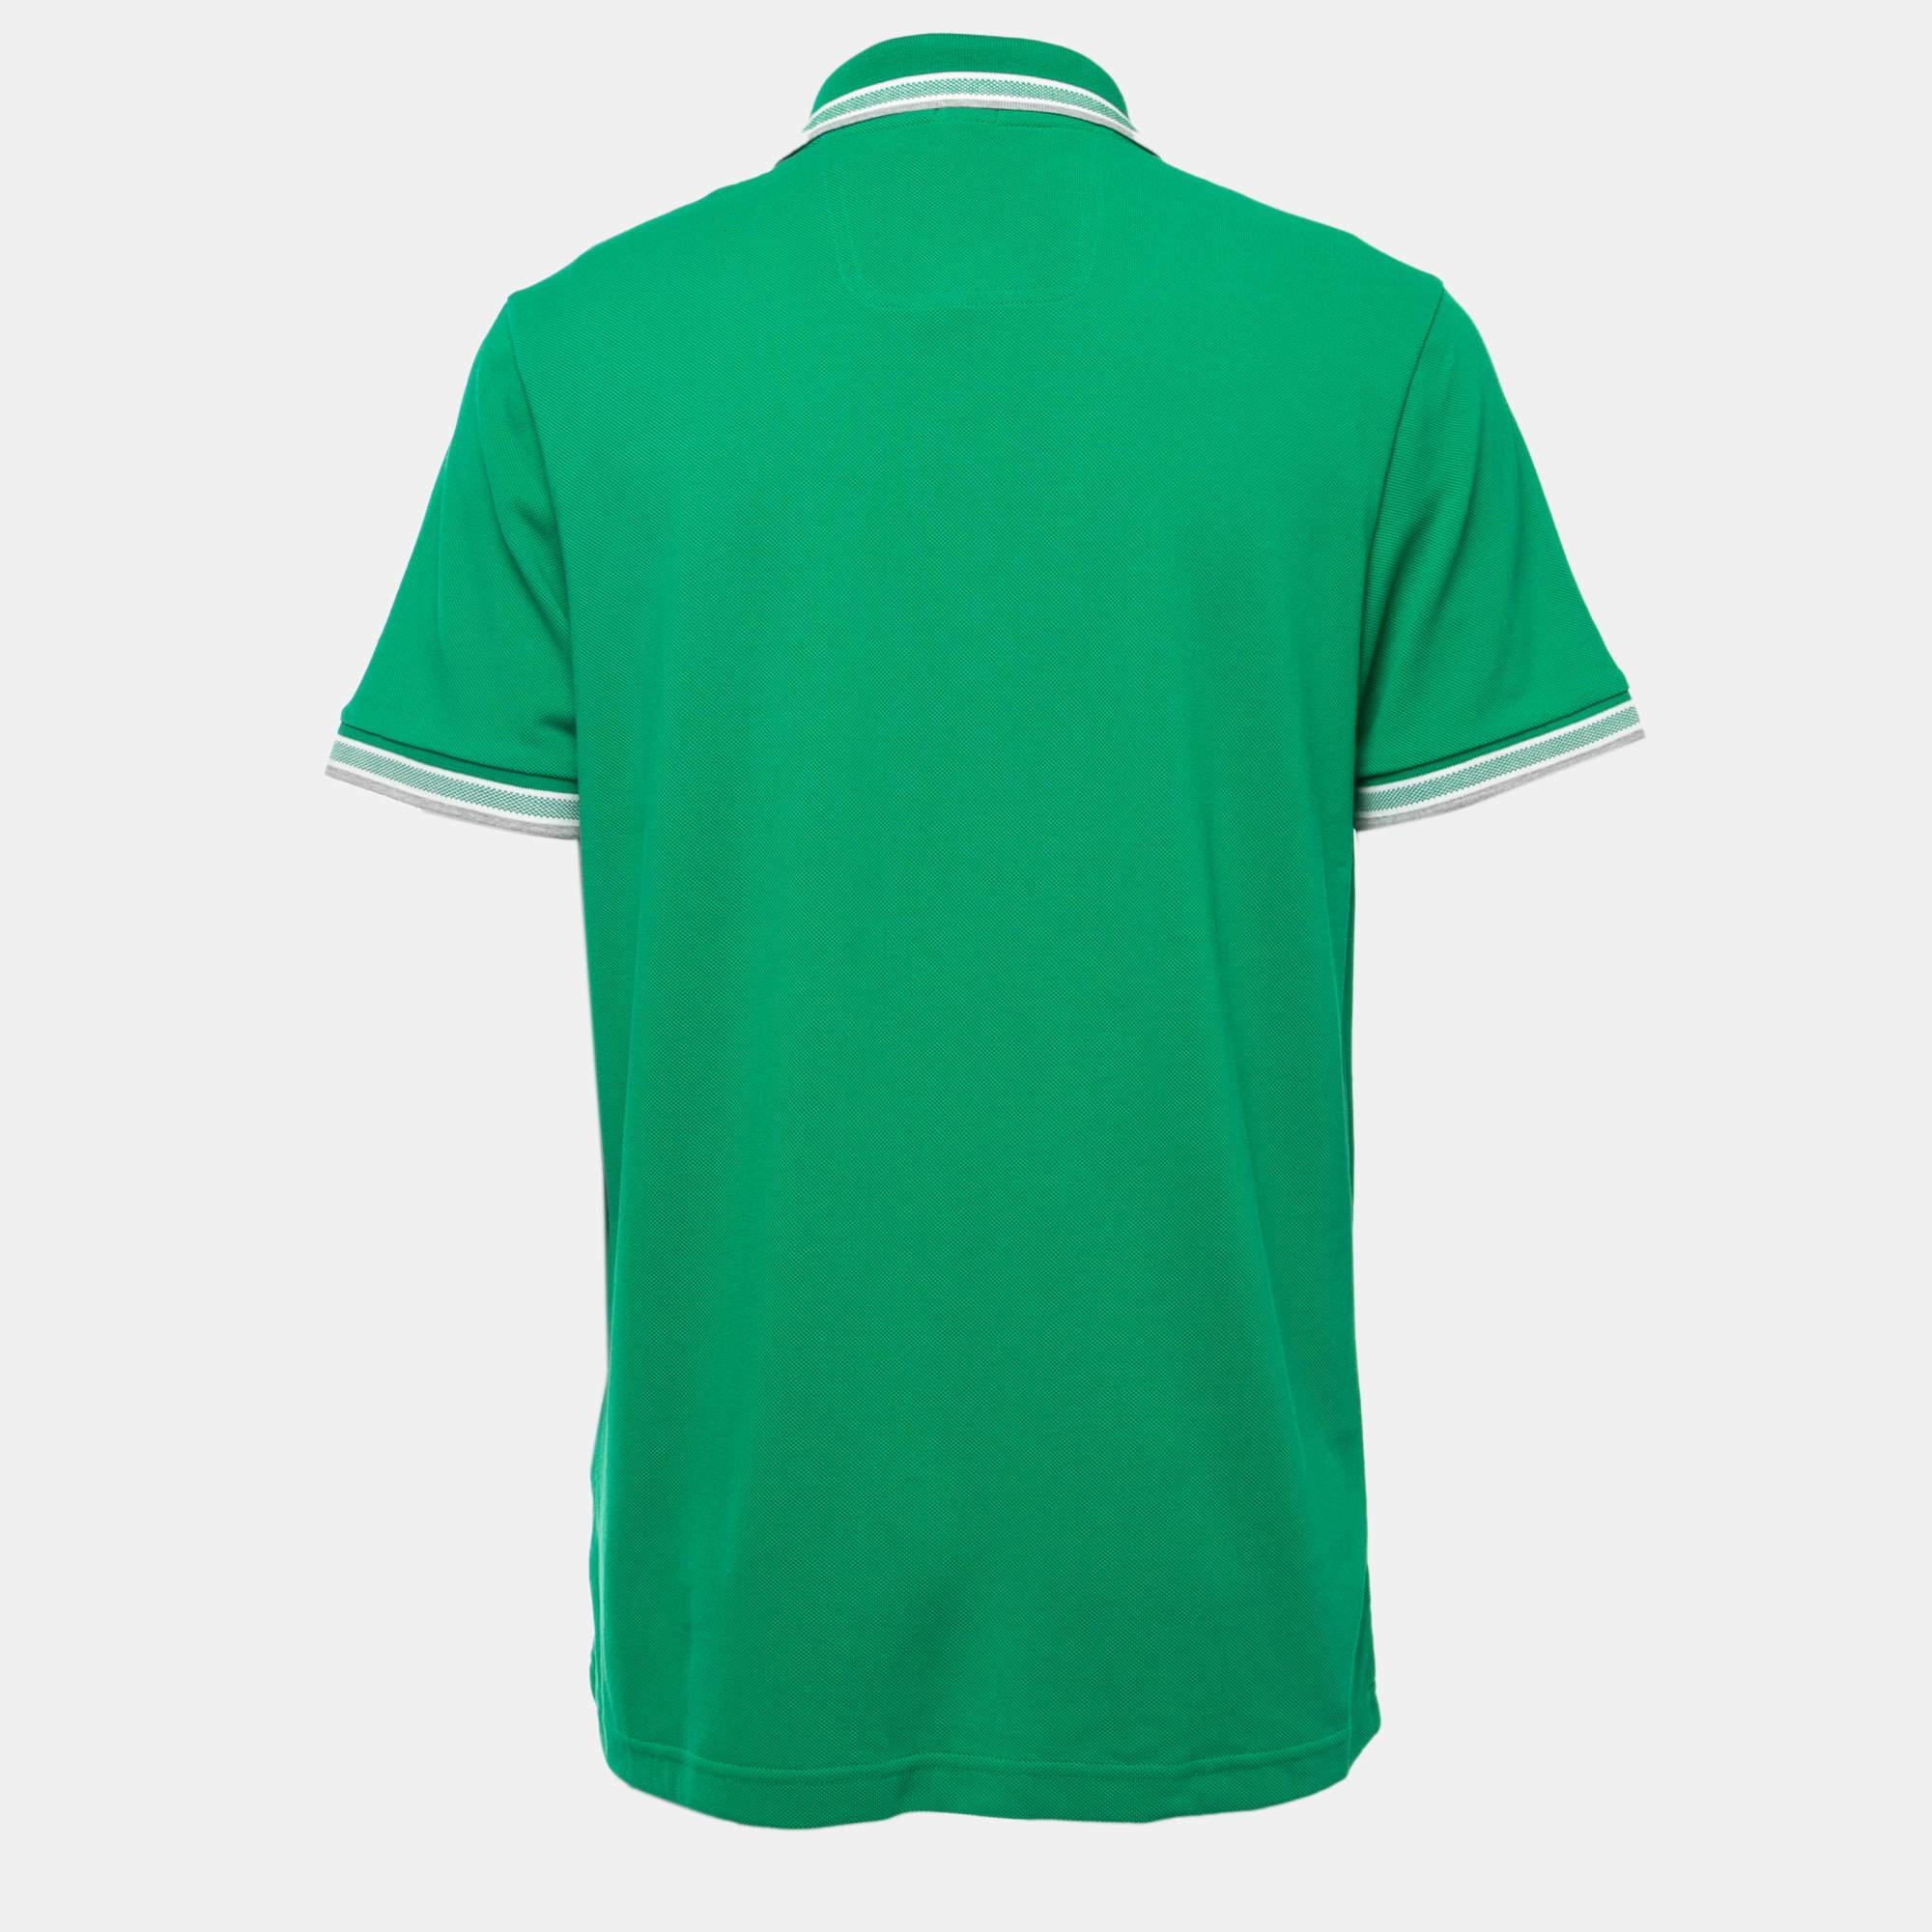 Boss By Hugo Boss' polo t-shirts have always been a classic pick for men. This iteration is tailored using cotton-piqué in a green hue and finished off with the iconic logo and a buttoned placket. Complete your casual look with a pair of shorts and